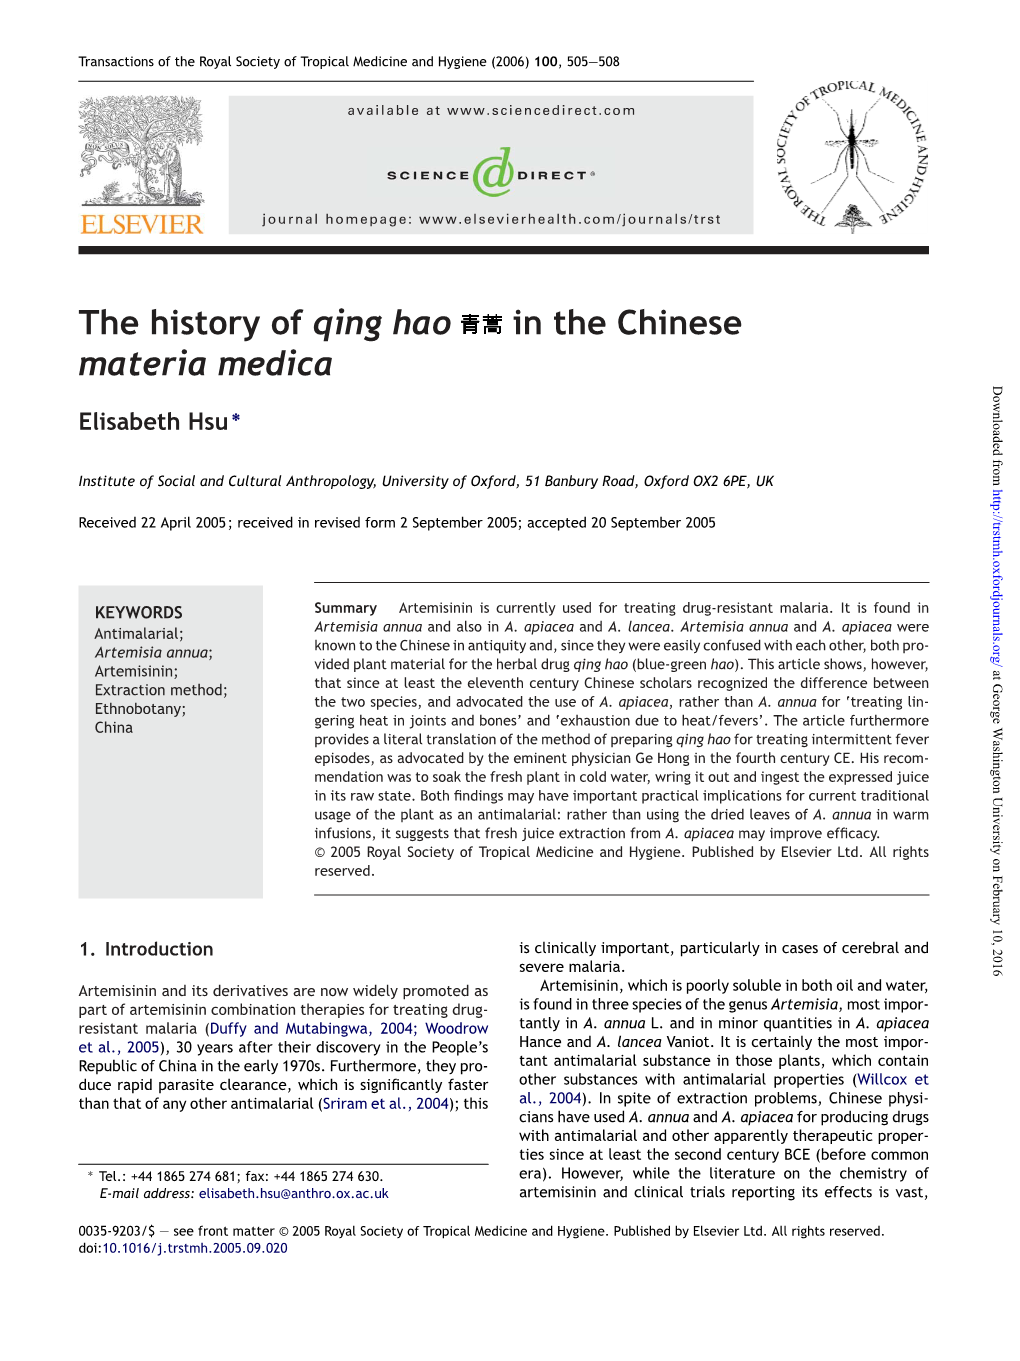 The History of Qing Hao in the Chinese Materia Medica Downloaded From